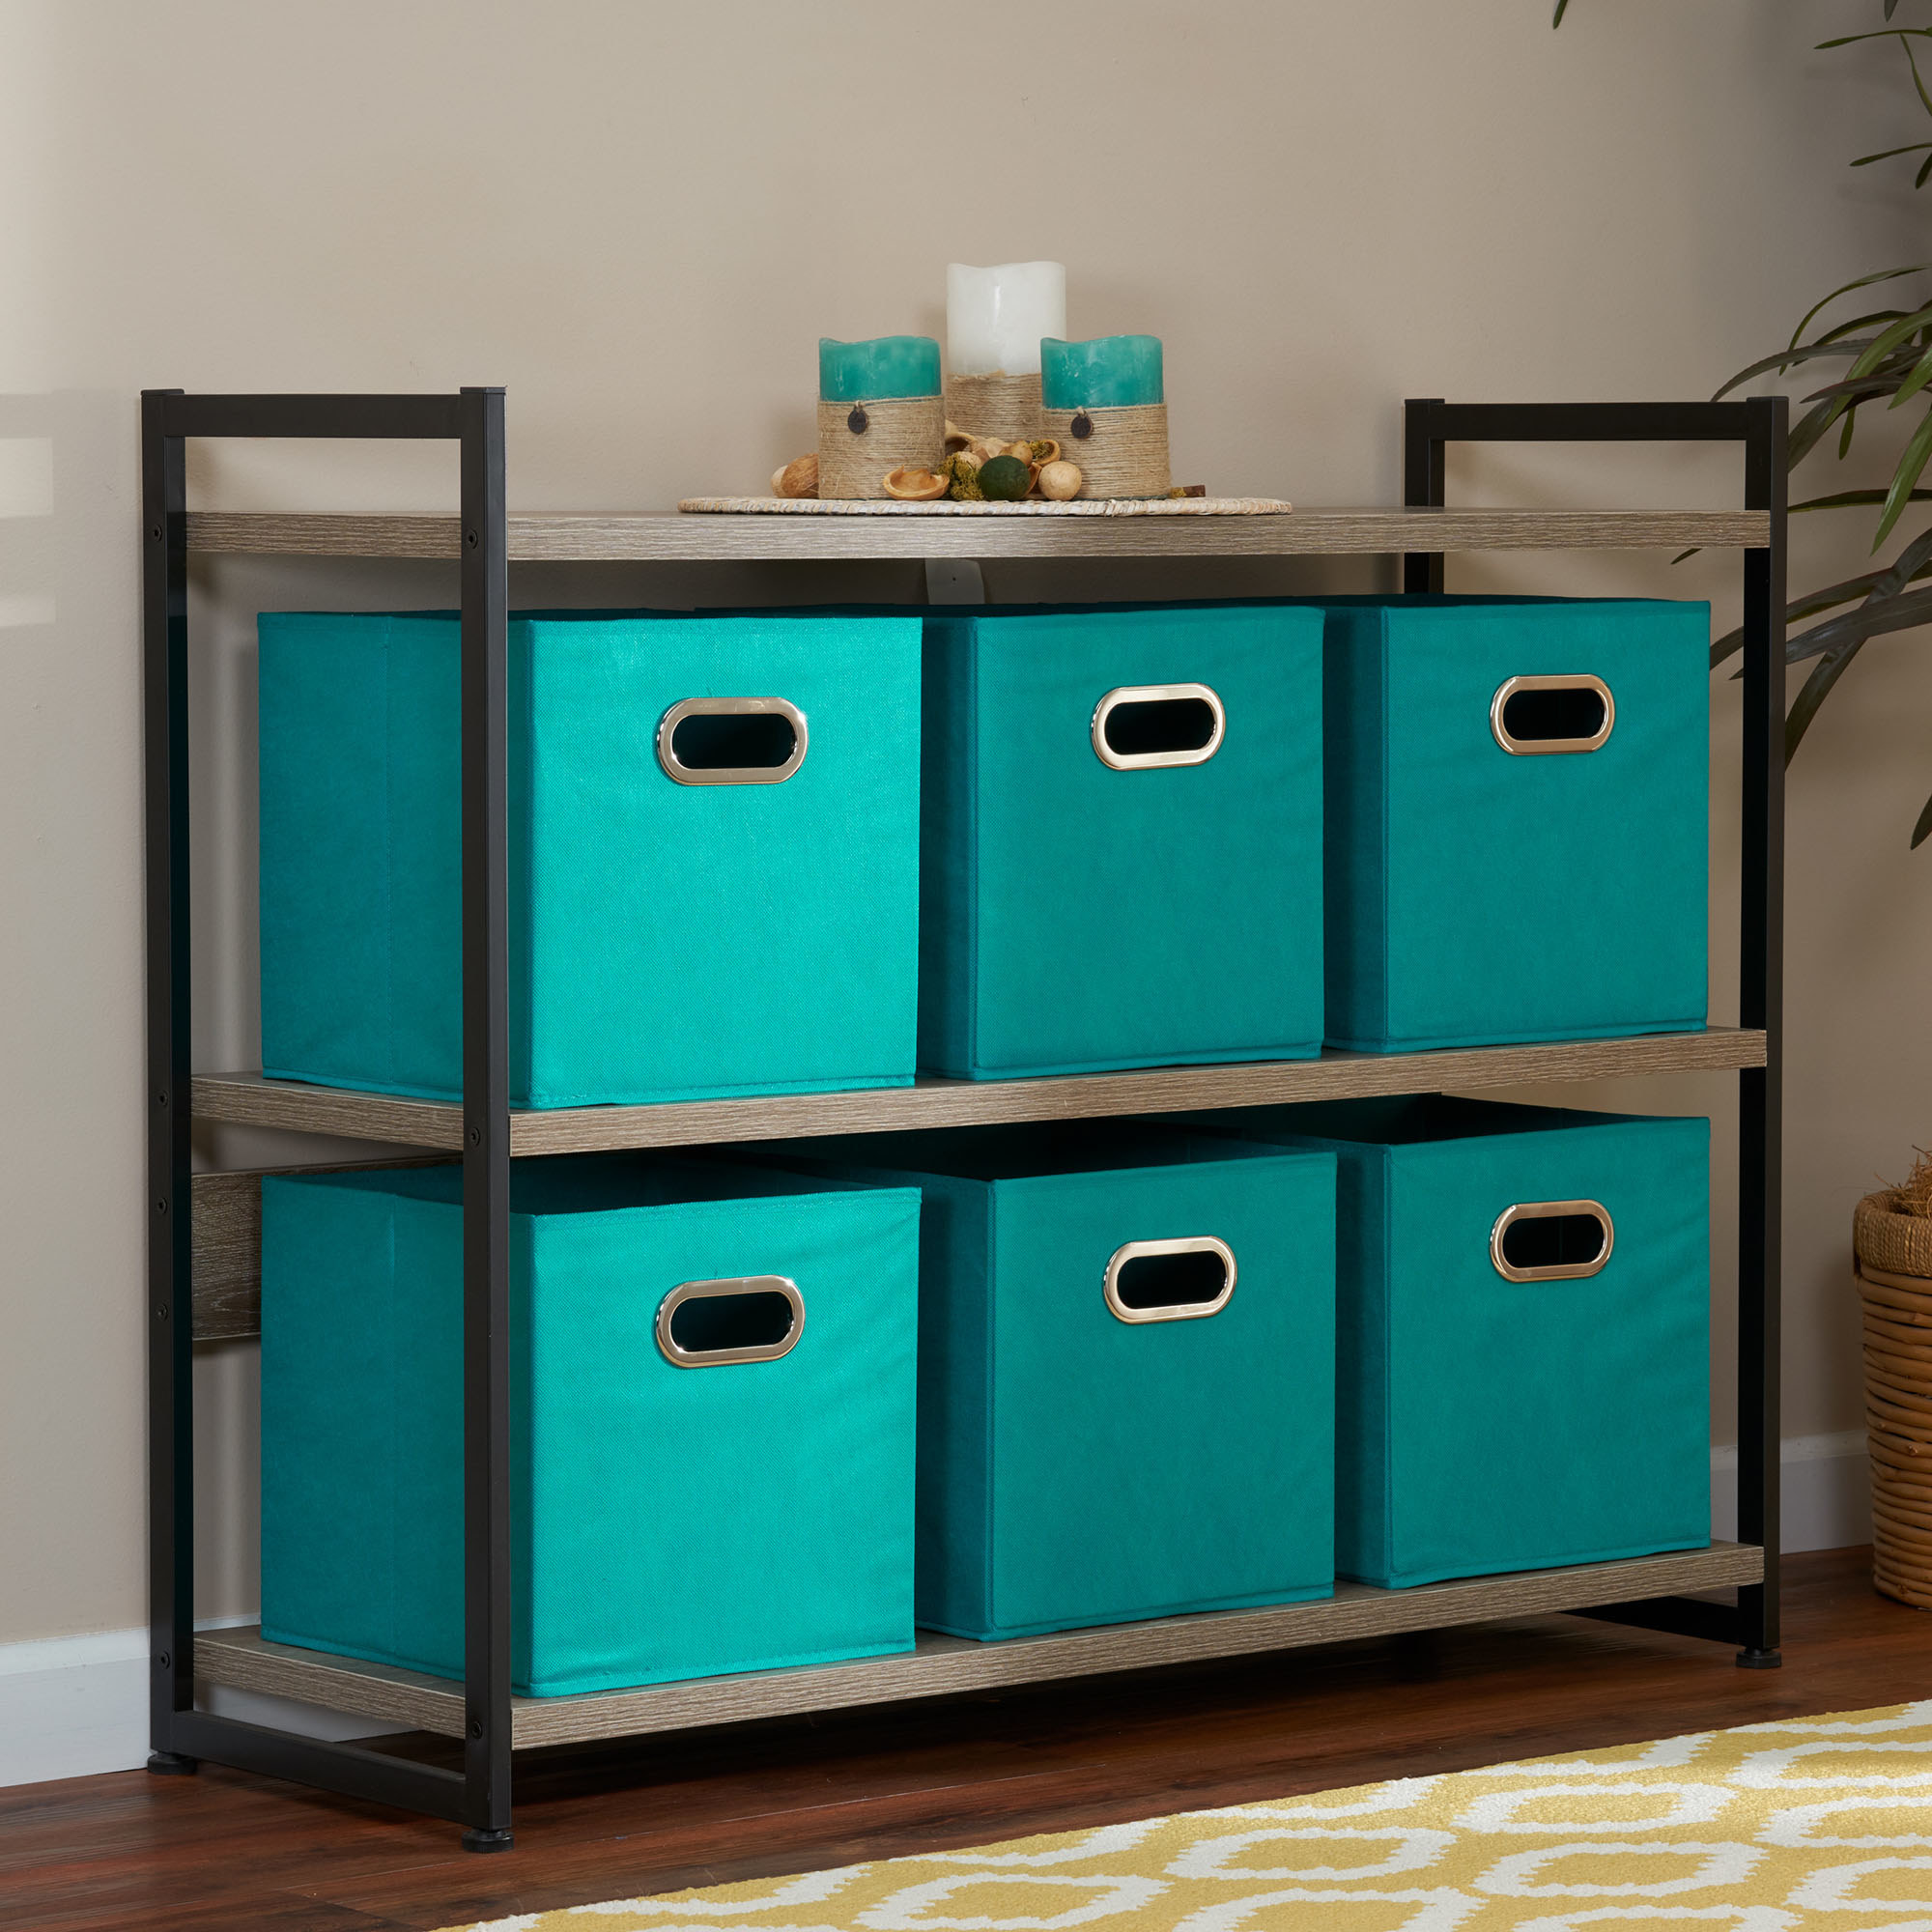 6 teal colored storage cubes on a two-shelf console